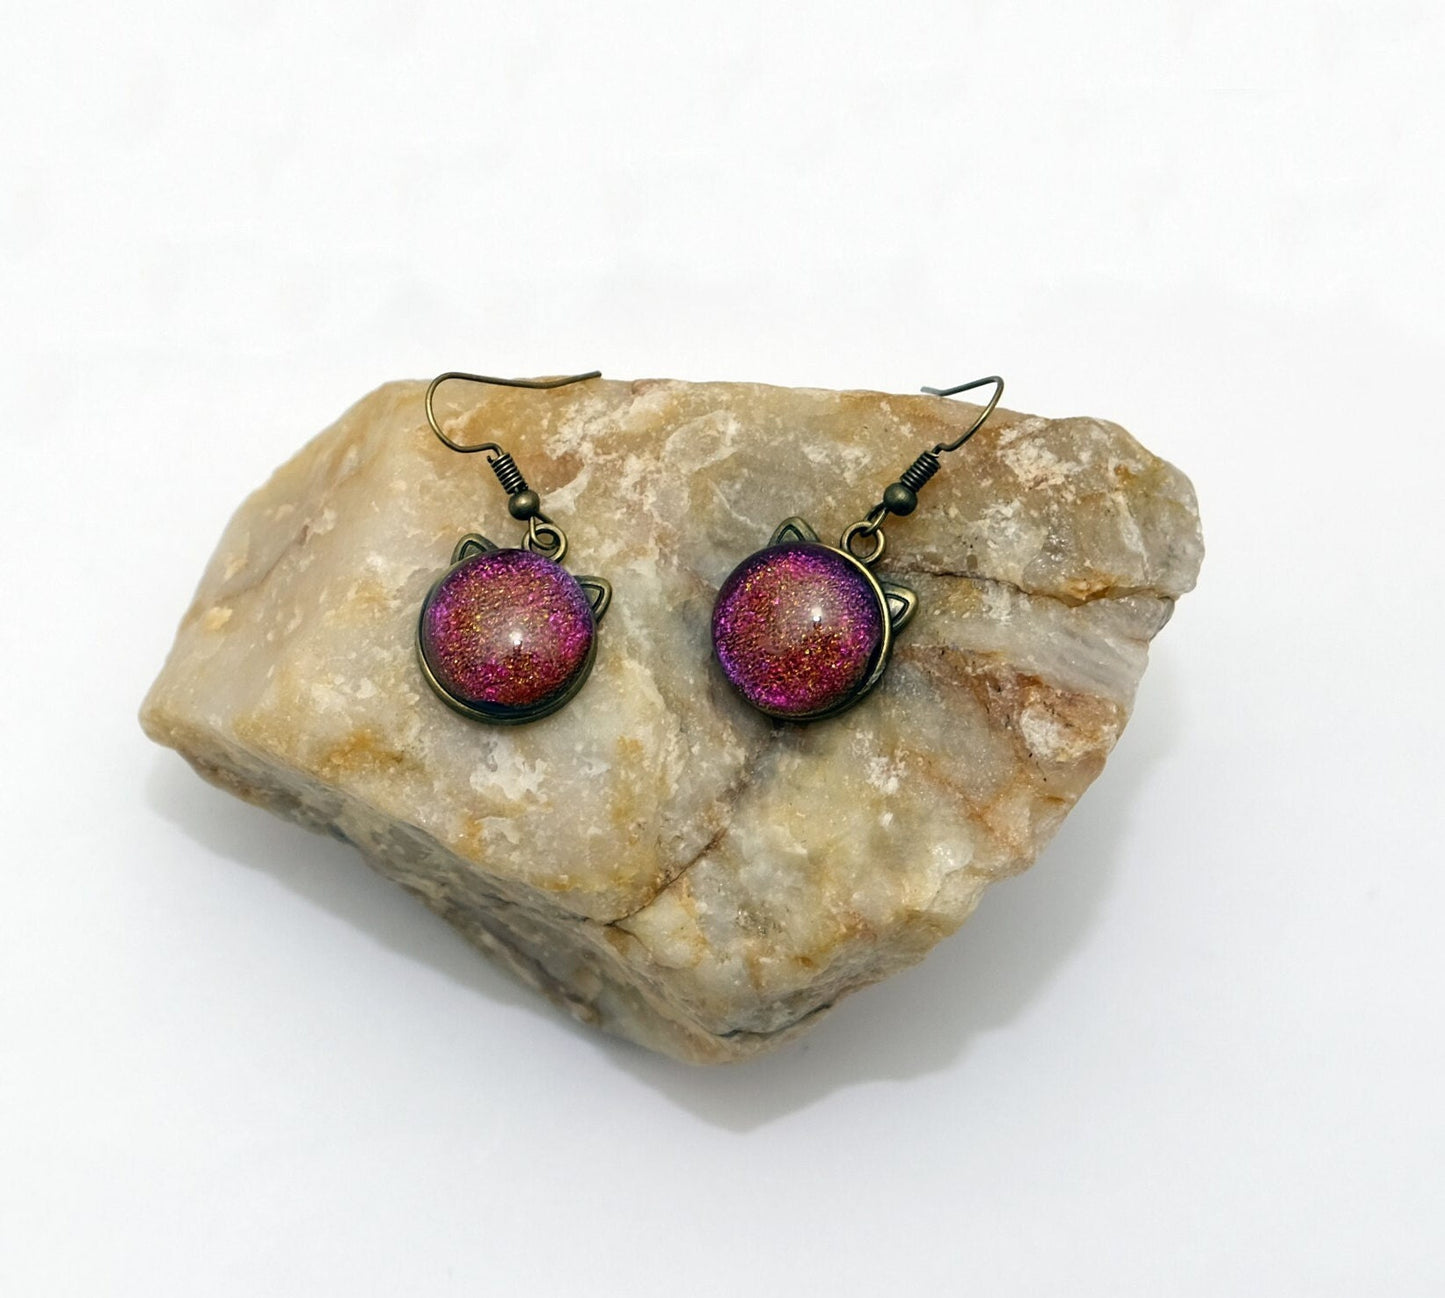 Whimsical Cat Head Shaped Pierced Earrings - Brass Tone with pinkish orange Dichroic Glass